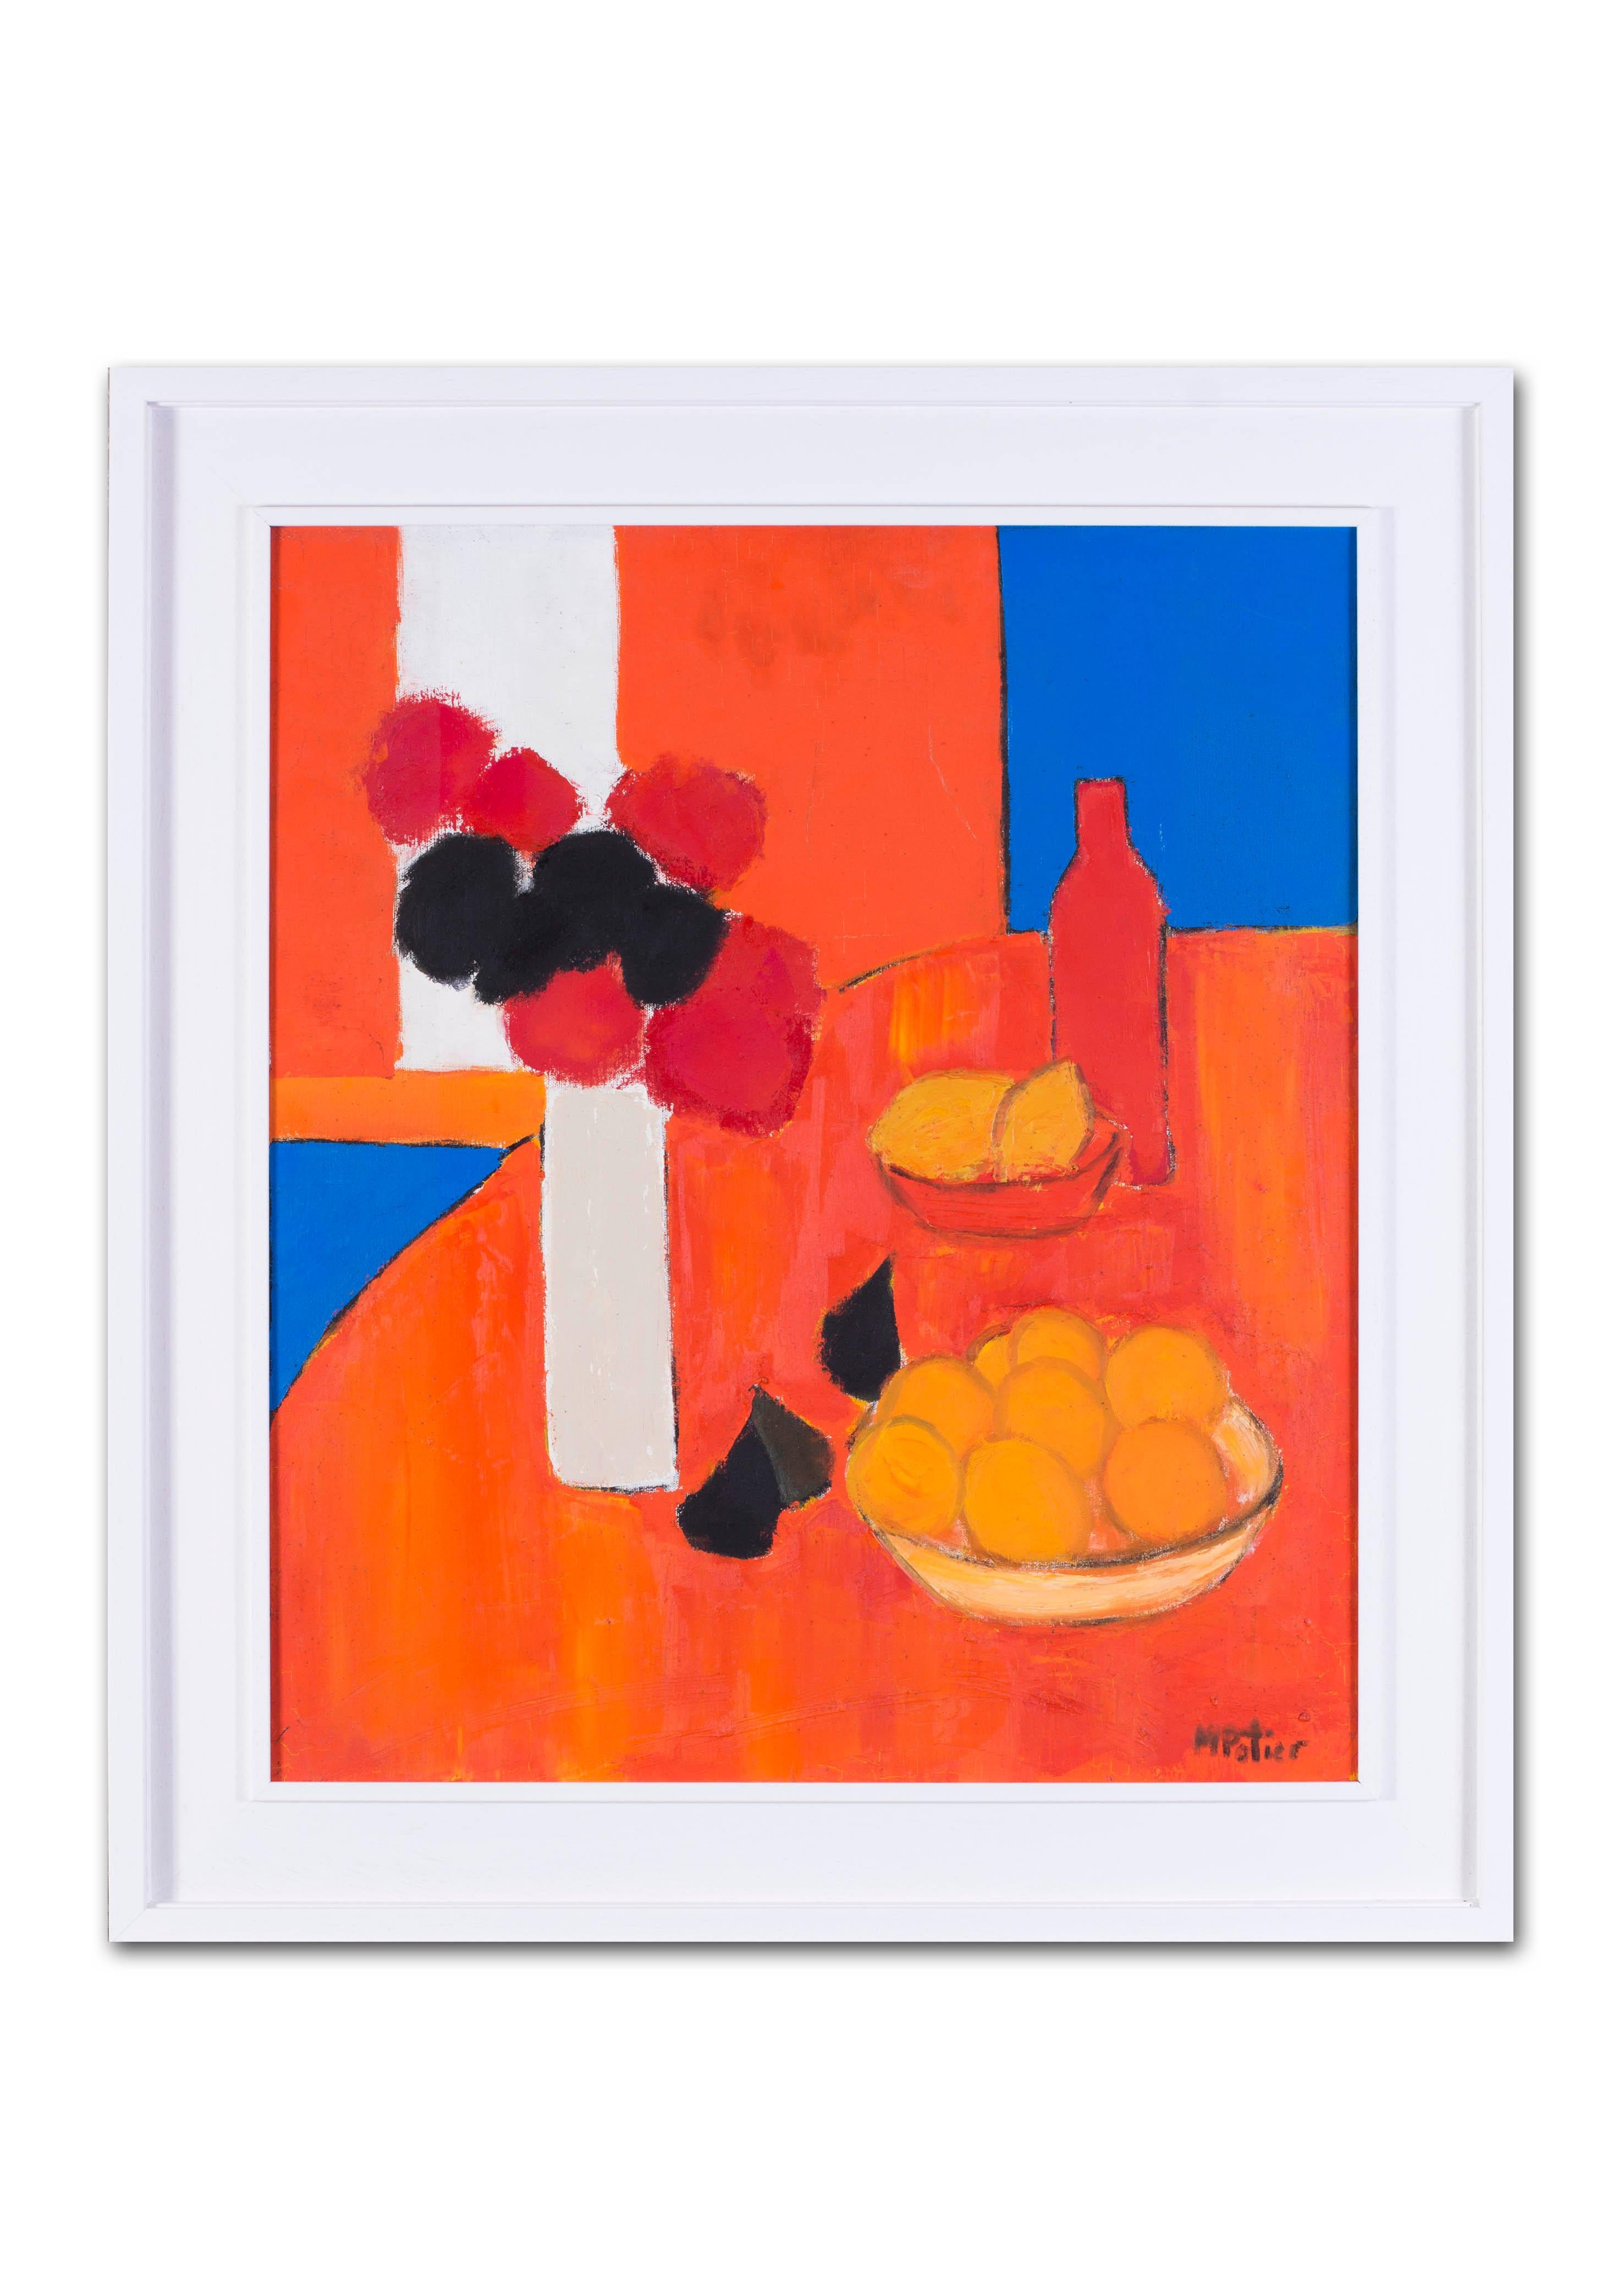 Maurice Potier (French, 1926 – 2002)
Oranges, figs, lemons and a vase of flowers
Oil on canvas
Signed ‘M Potier’ (lower right), Further signed and dated Maurice Potier / 1994.
27.3/8 x 23.1/2 in. (69.6 x 59.5 cm.)
